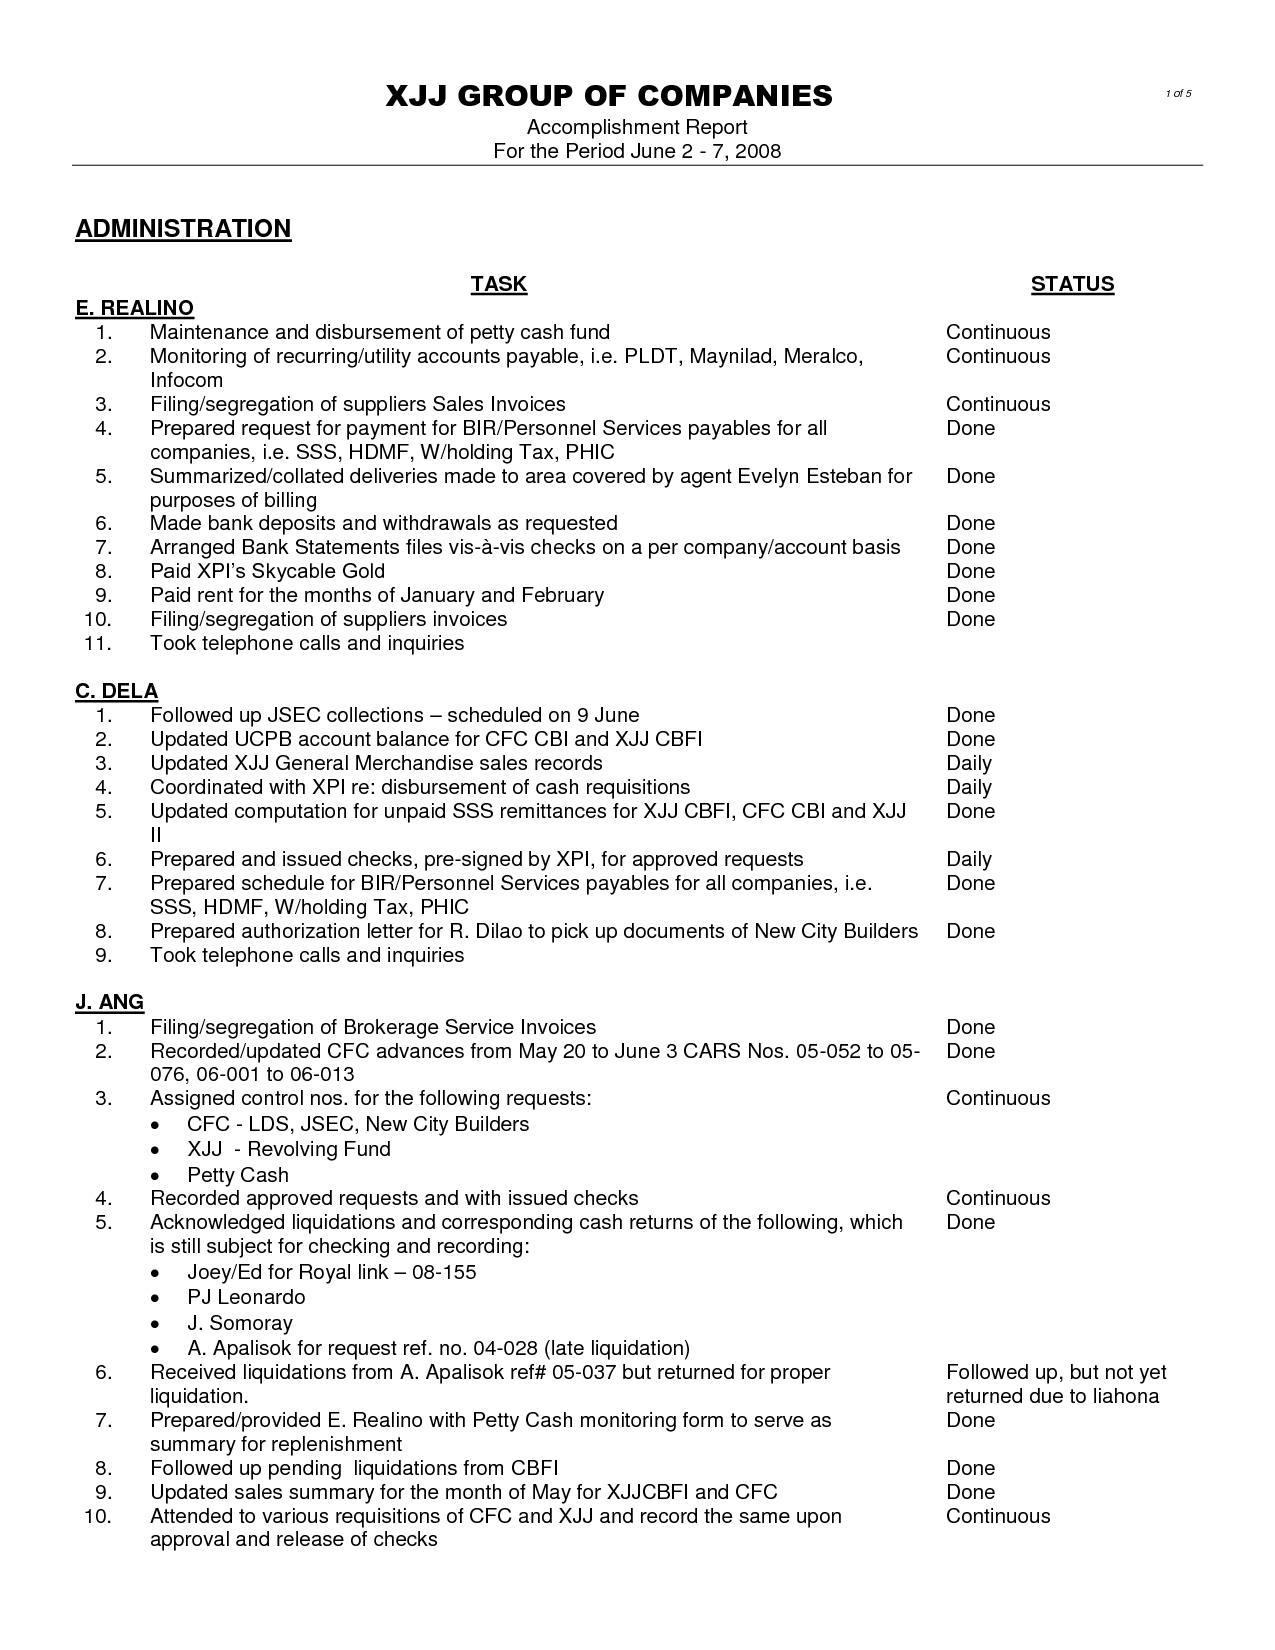 Premium Weekly Accomplishment Report Sample Format : V M D Throughout How To Write A Work Report Template